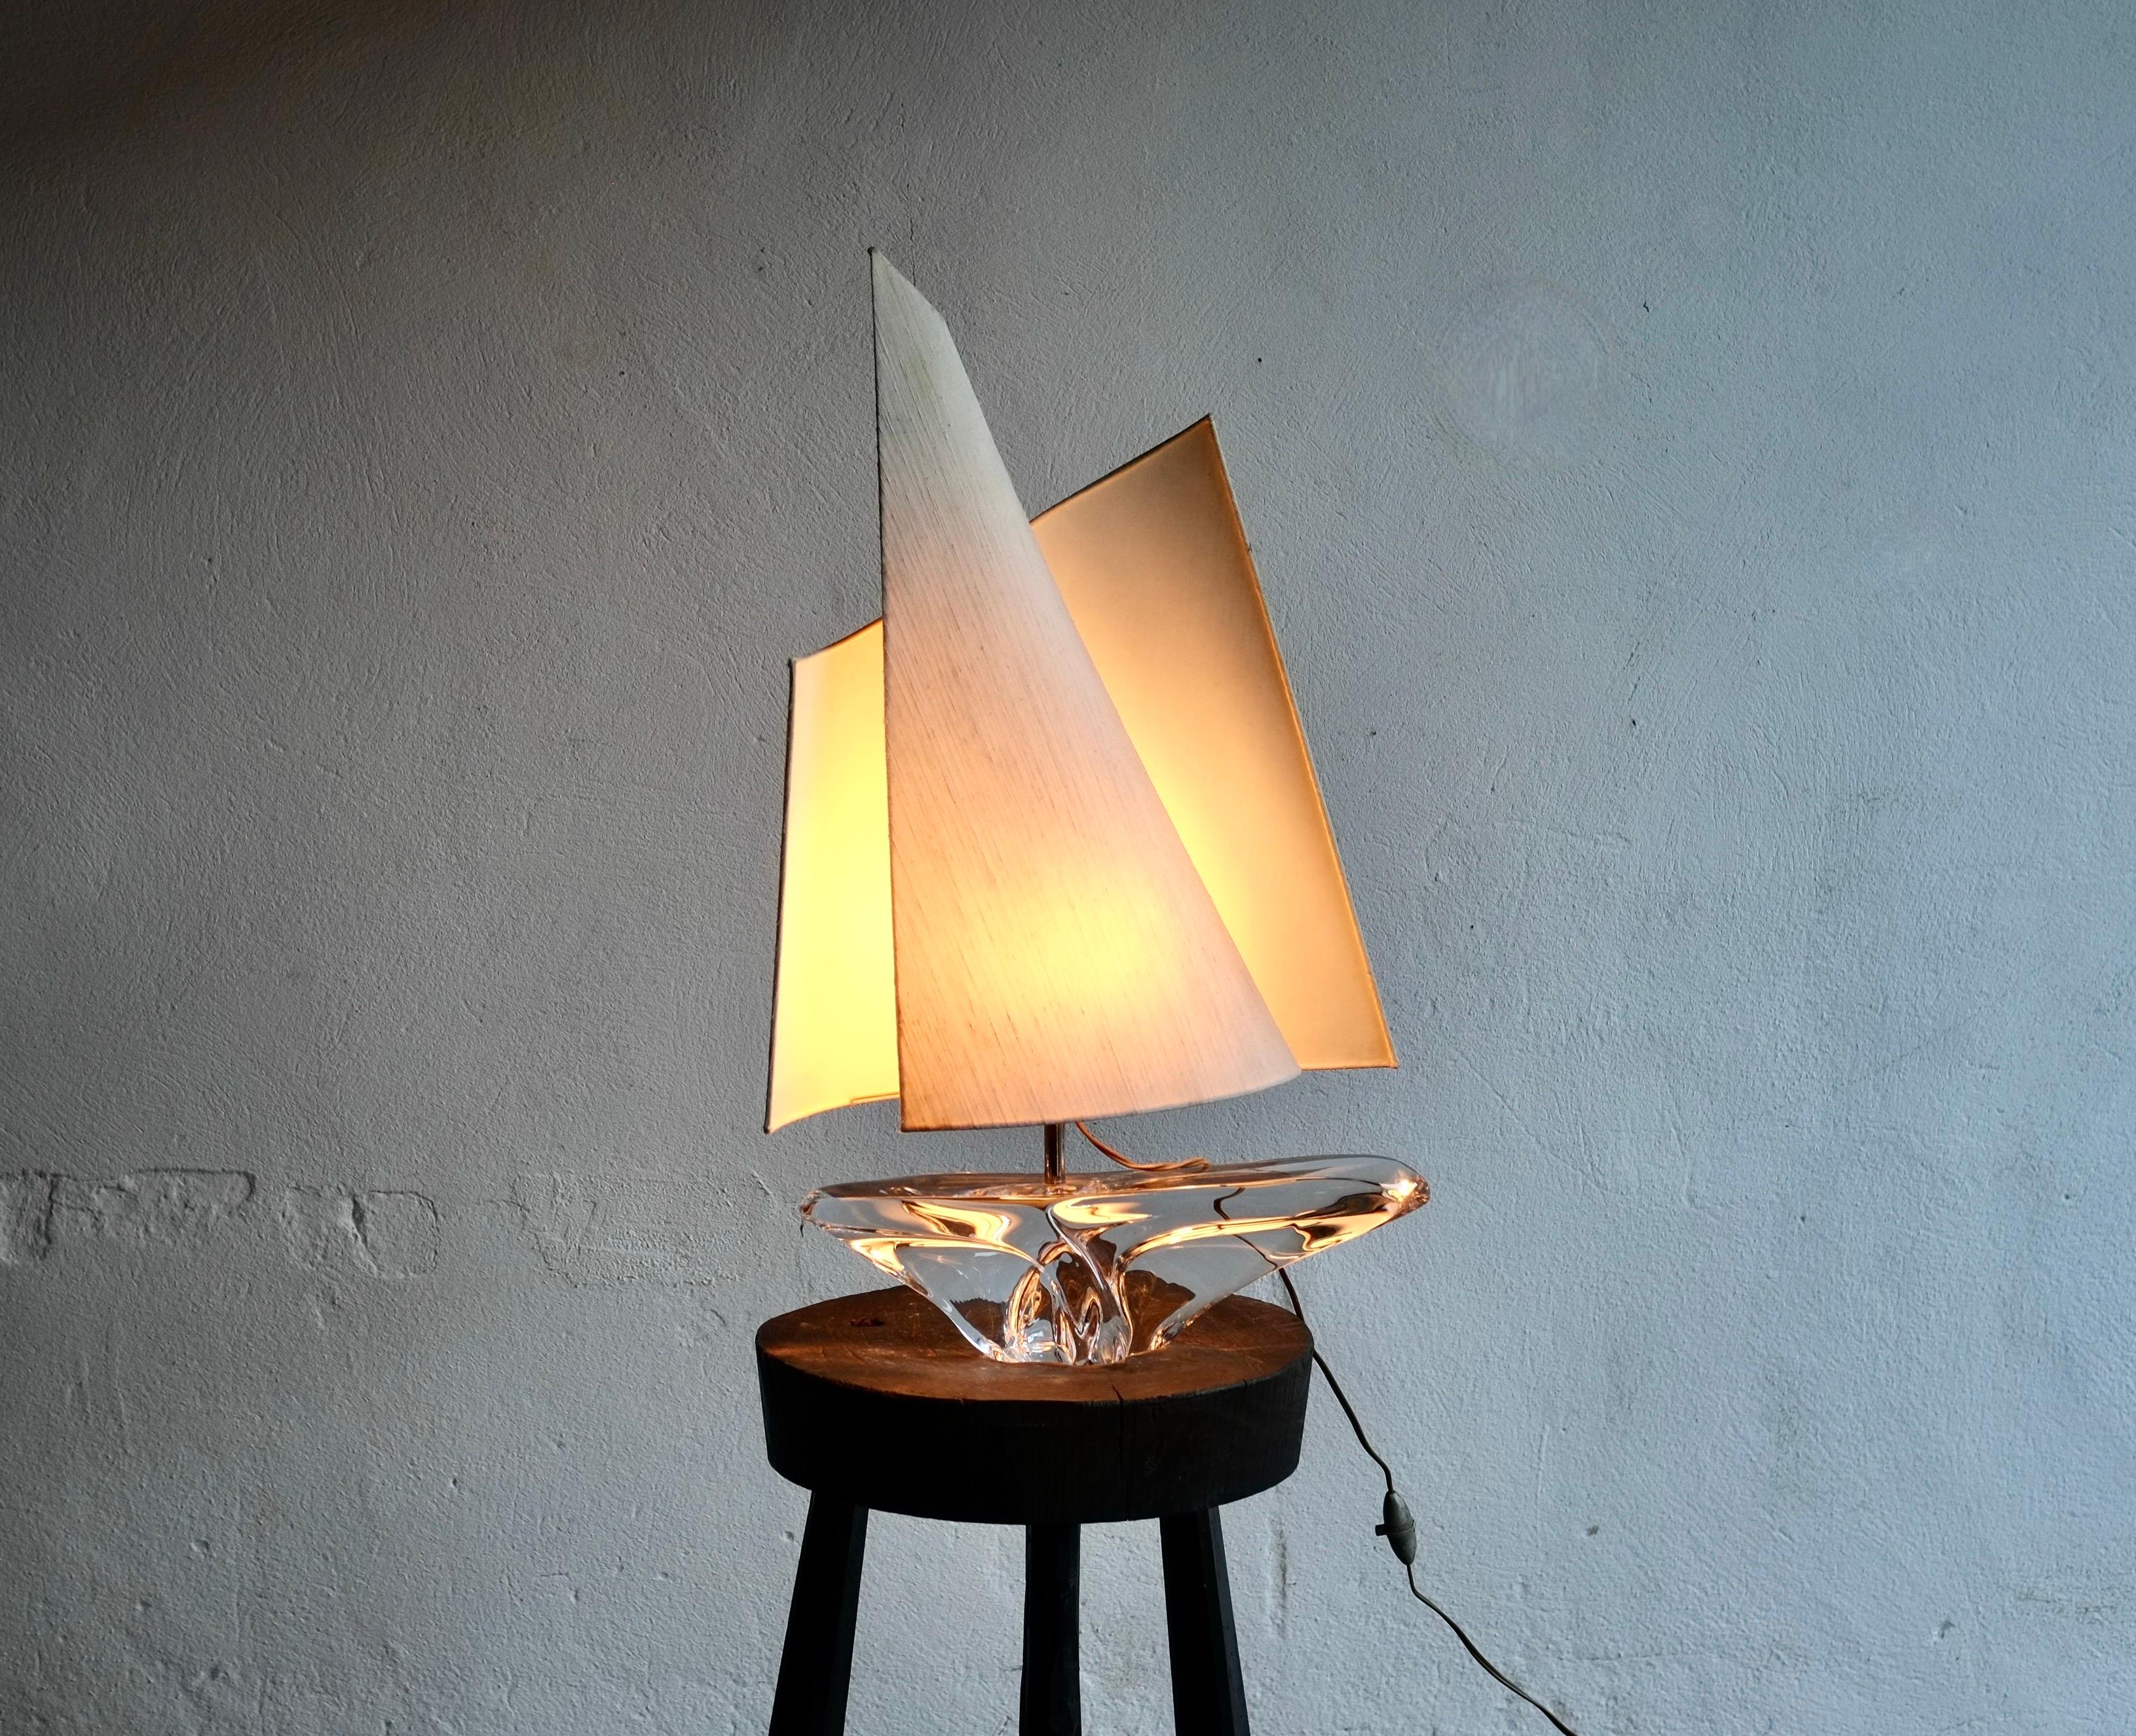 A large sailboat lamp manufactured by Daum, France in the 1960's.

Crystal glass base with a striking sculptural shade. The glass in in fabulous condition with no damage, one of the internal rods in the shade has had a solder repair.

Including